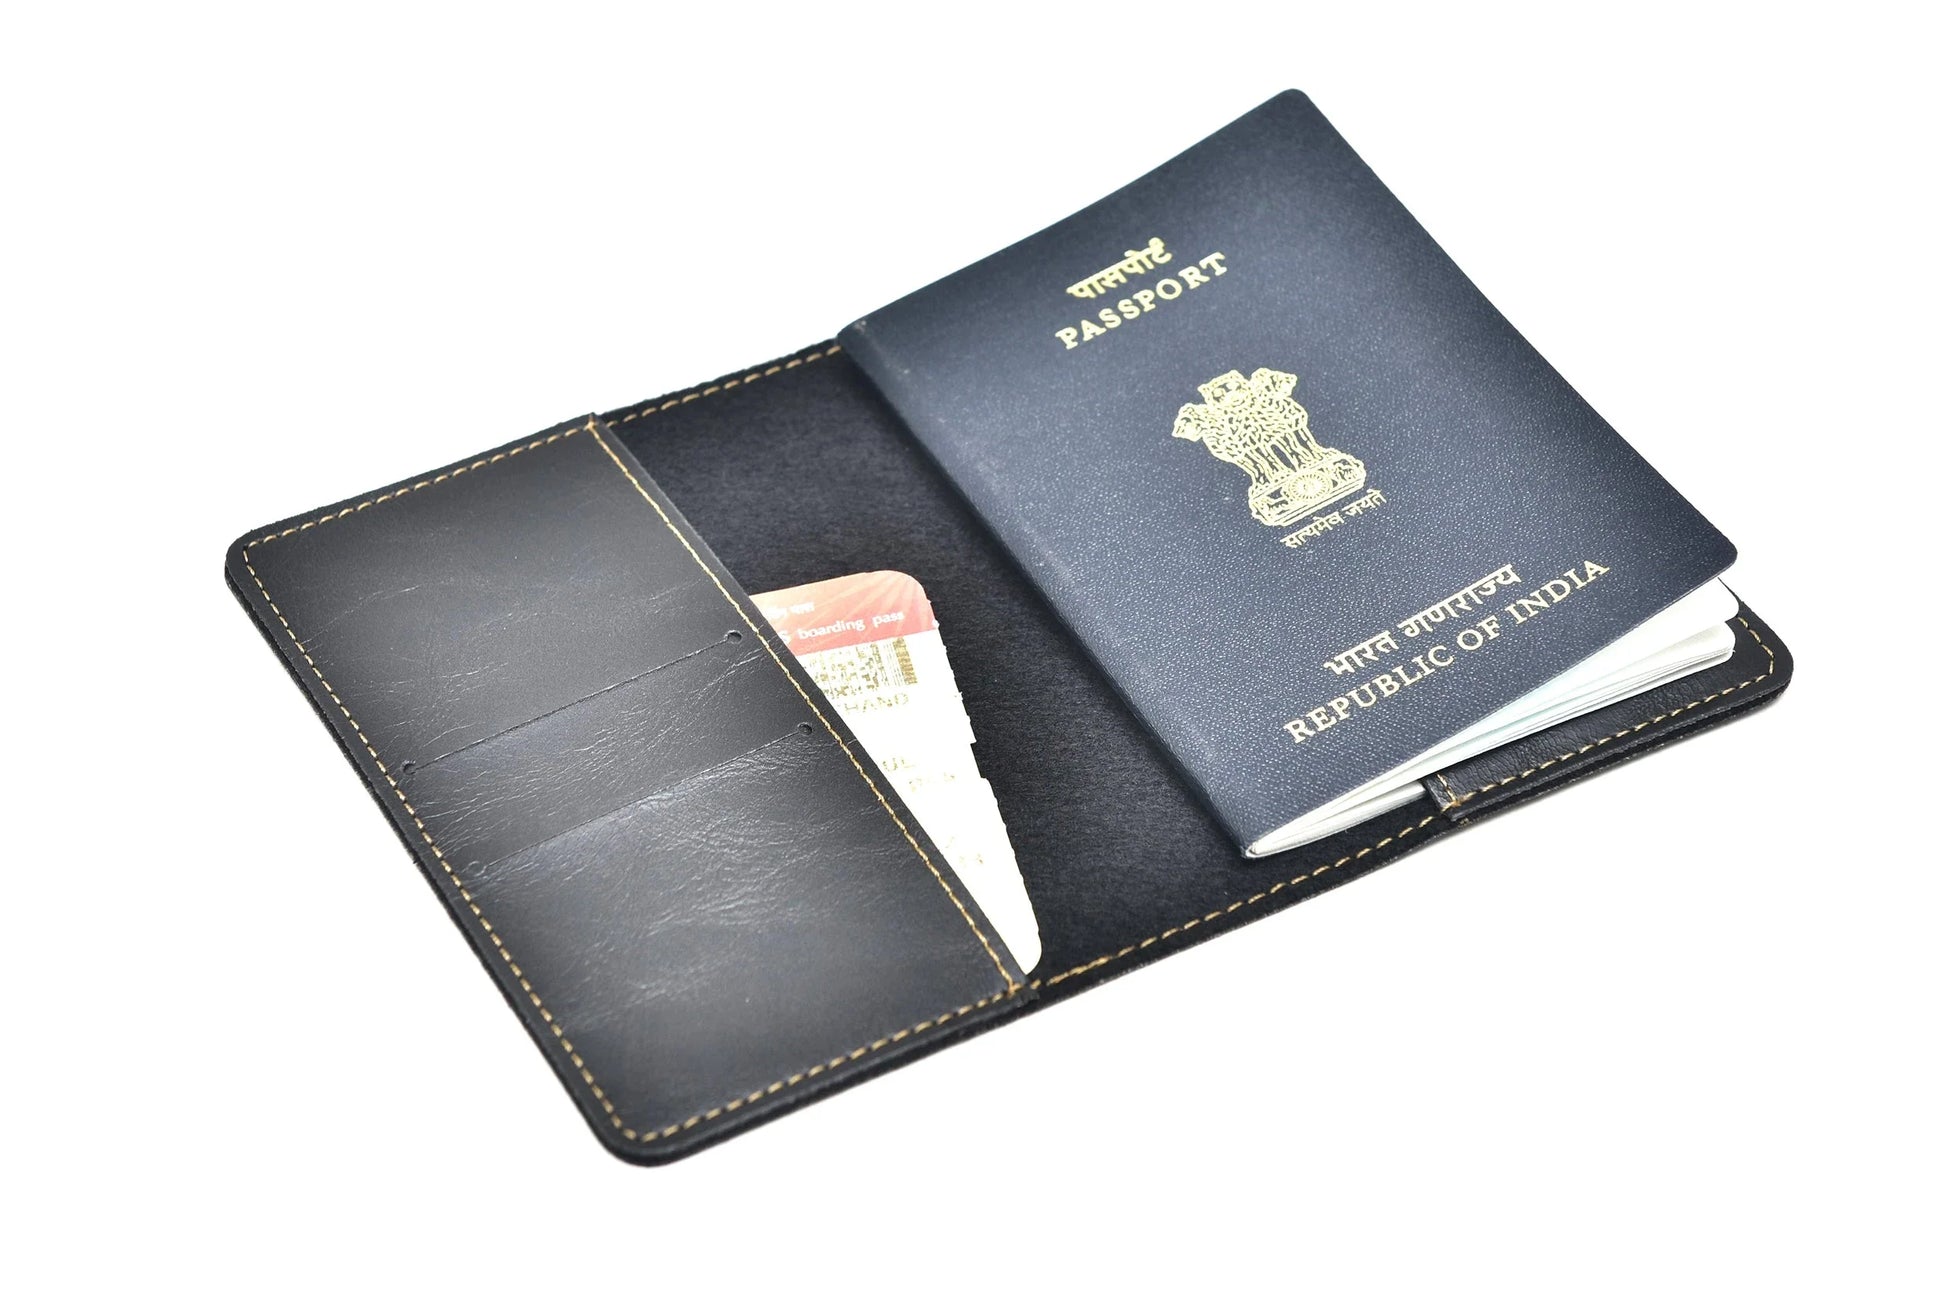 Inside or open view of black passport case